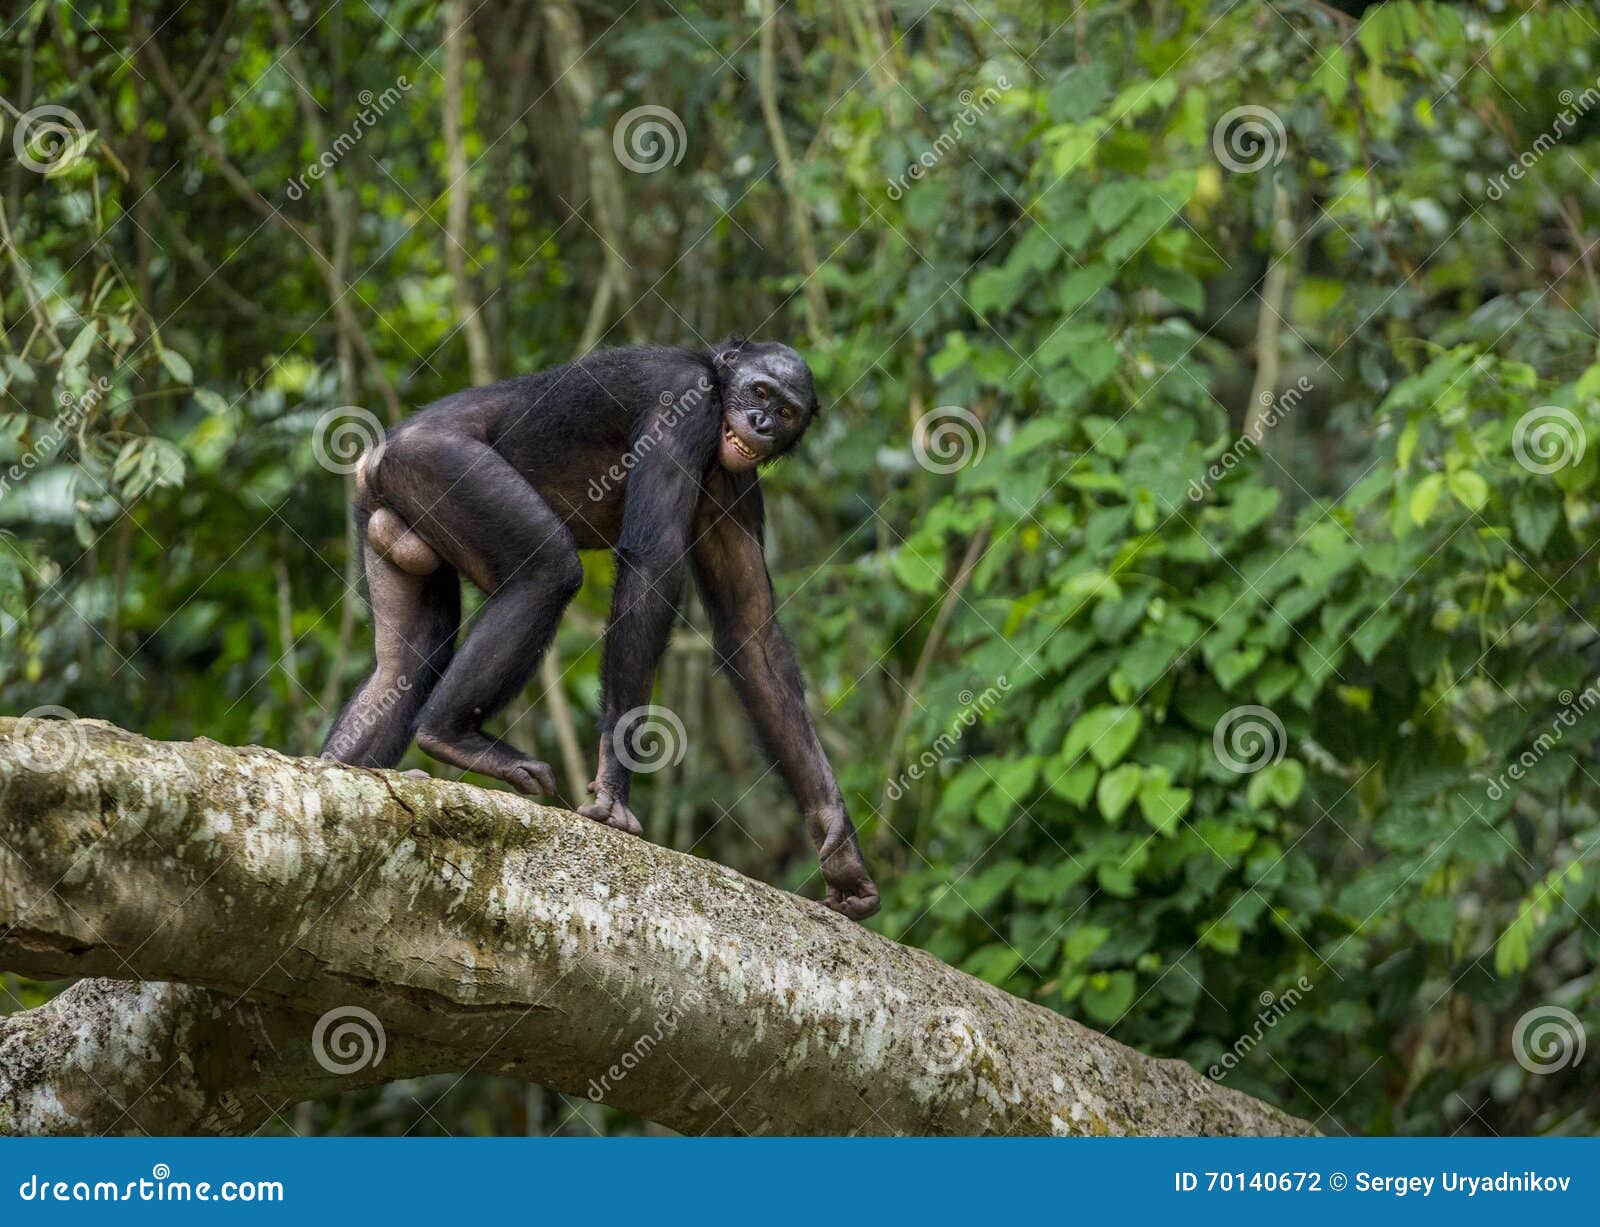 bonobos (pan paniscus) on a tree branch. green natural jungle background.